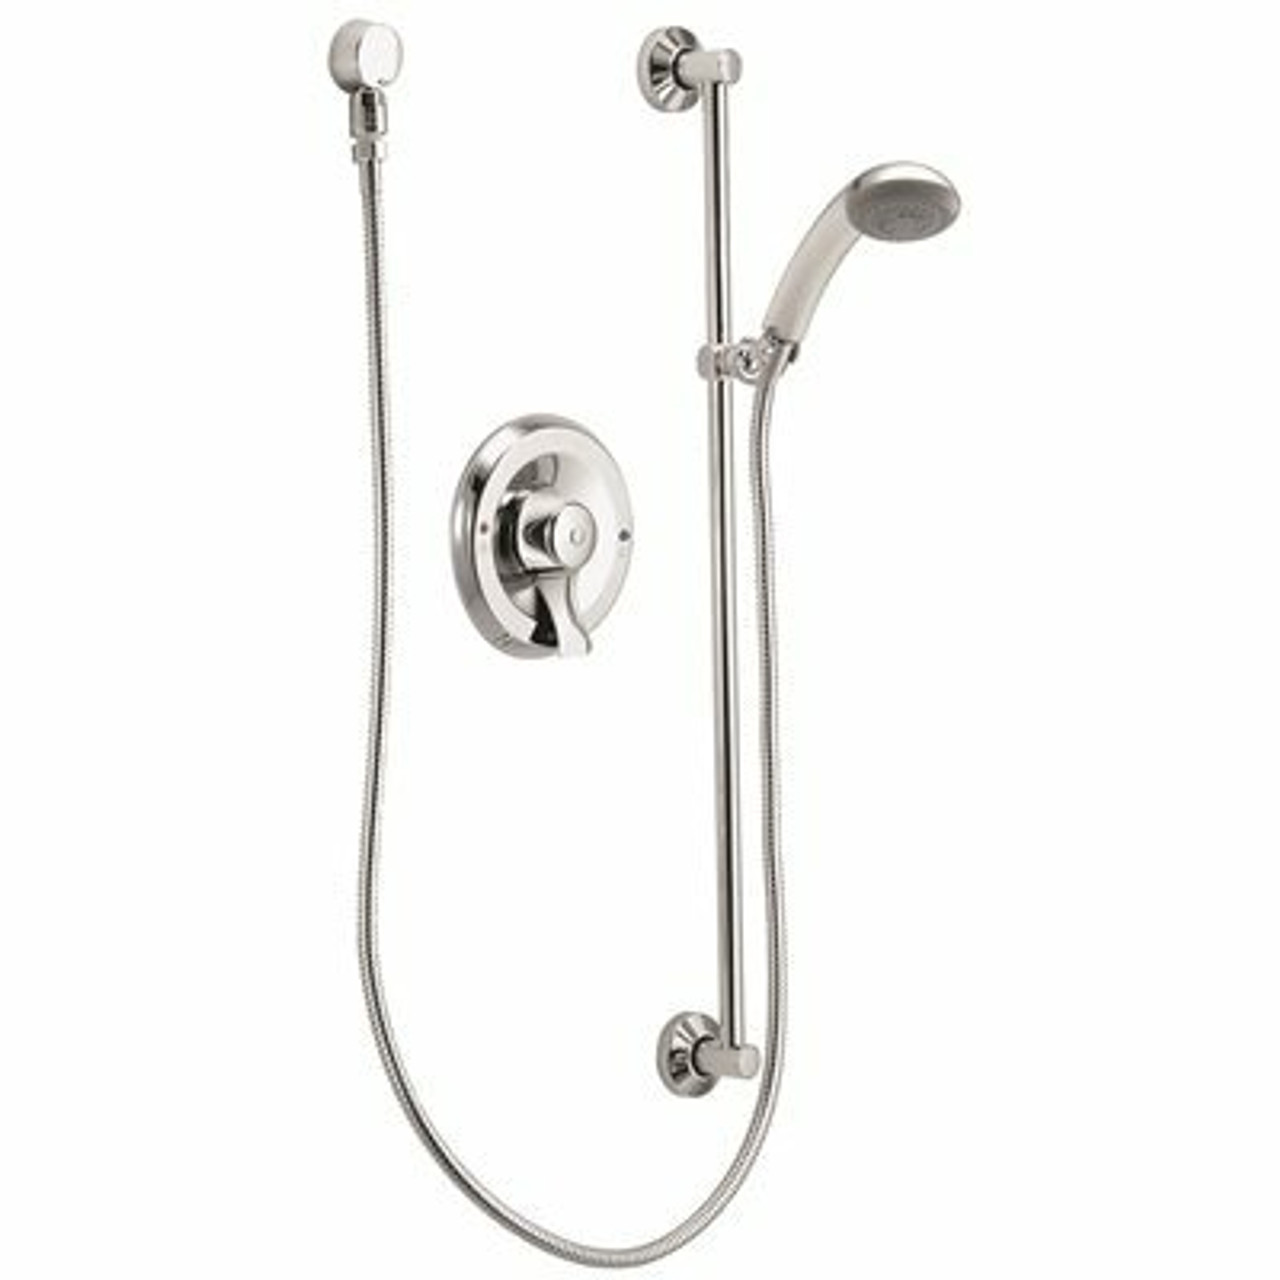 Moen Commercial 1-Spray Shower-Only Wall Bar With Hand Shower Faucet In Chrome